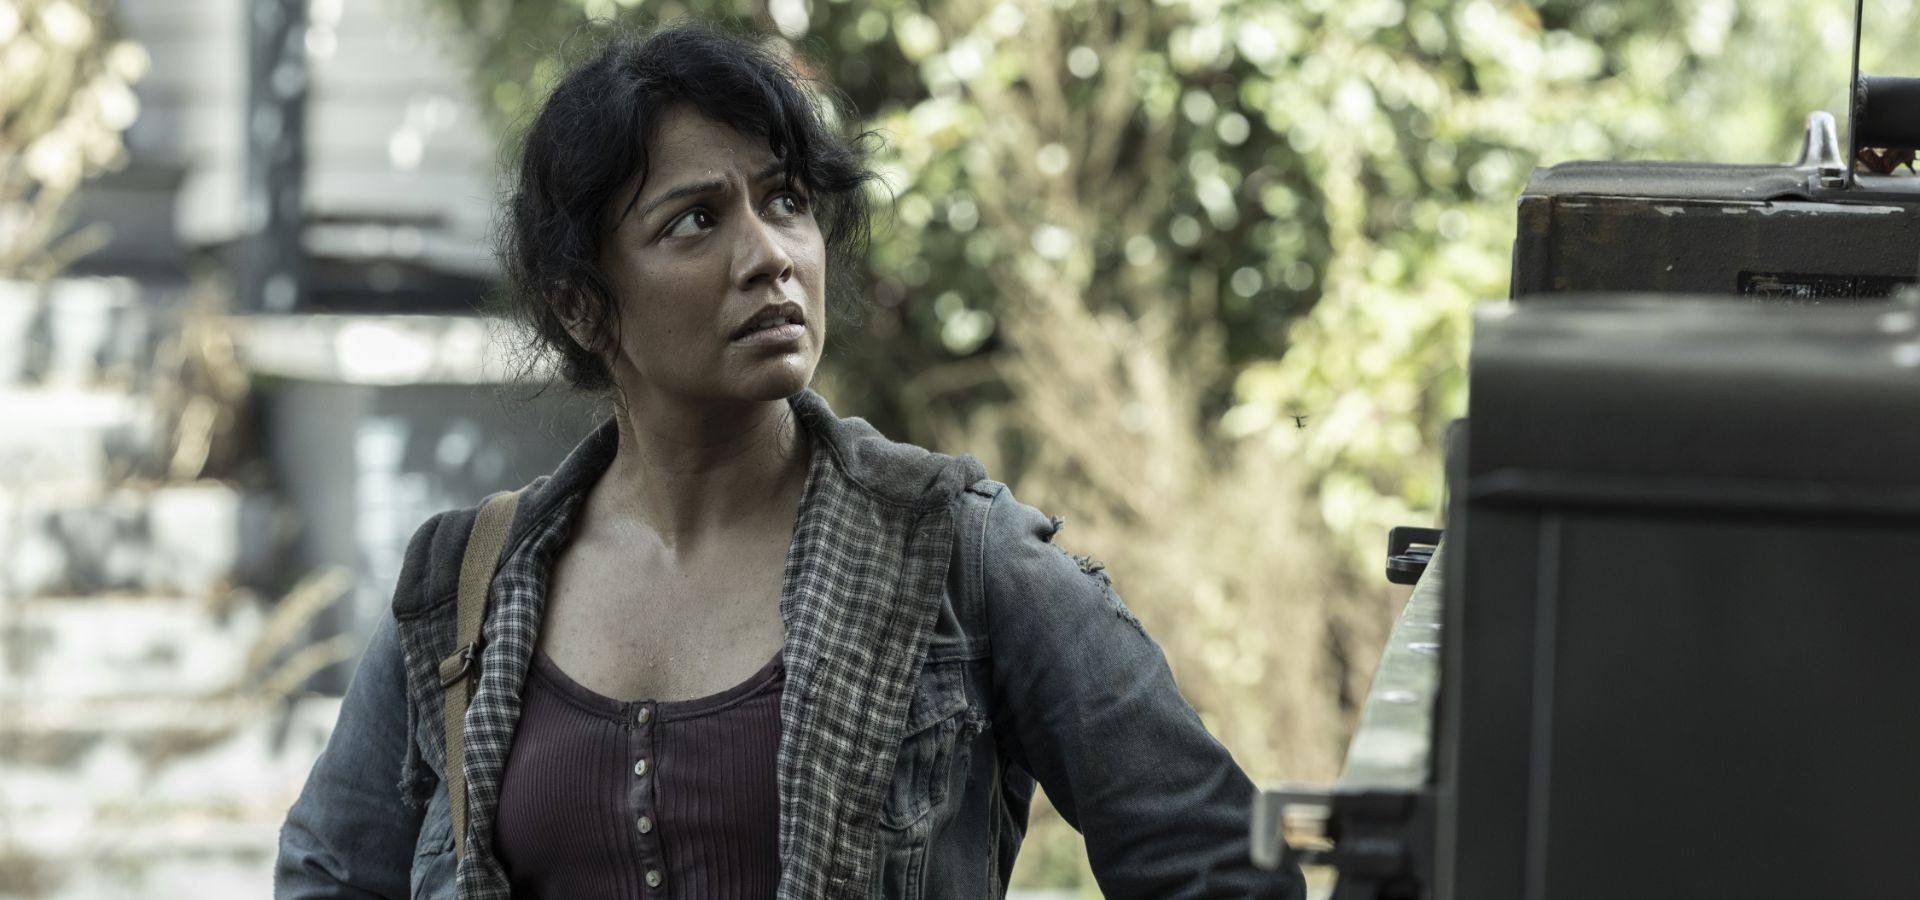 Fear the Walking Dead Q&A — Karen David on Grace's Death and Her Last Scene with Lennie James